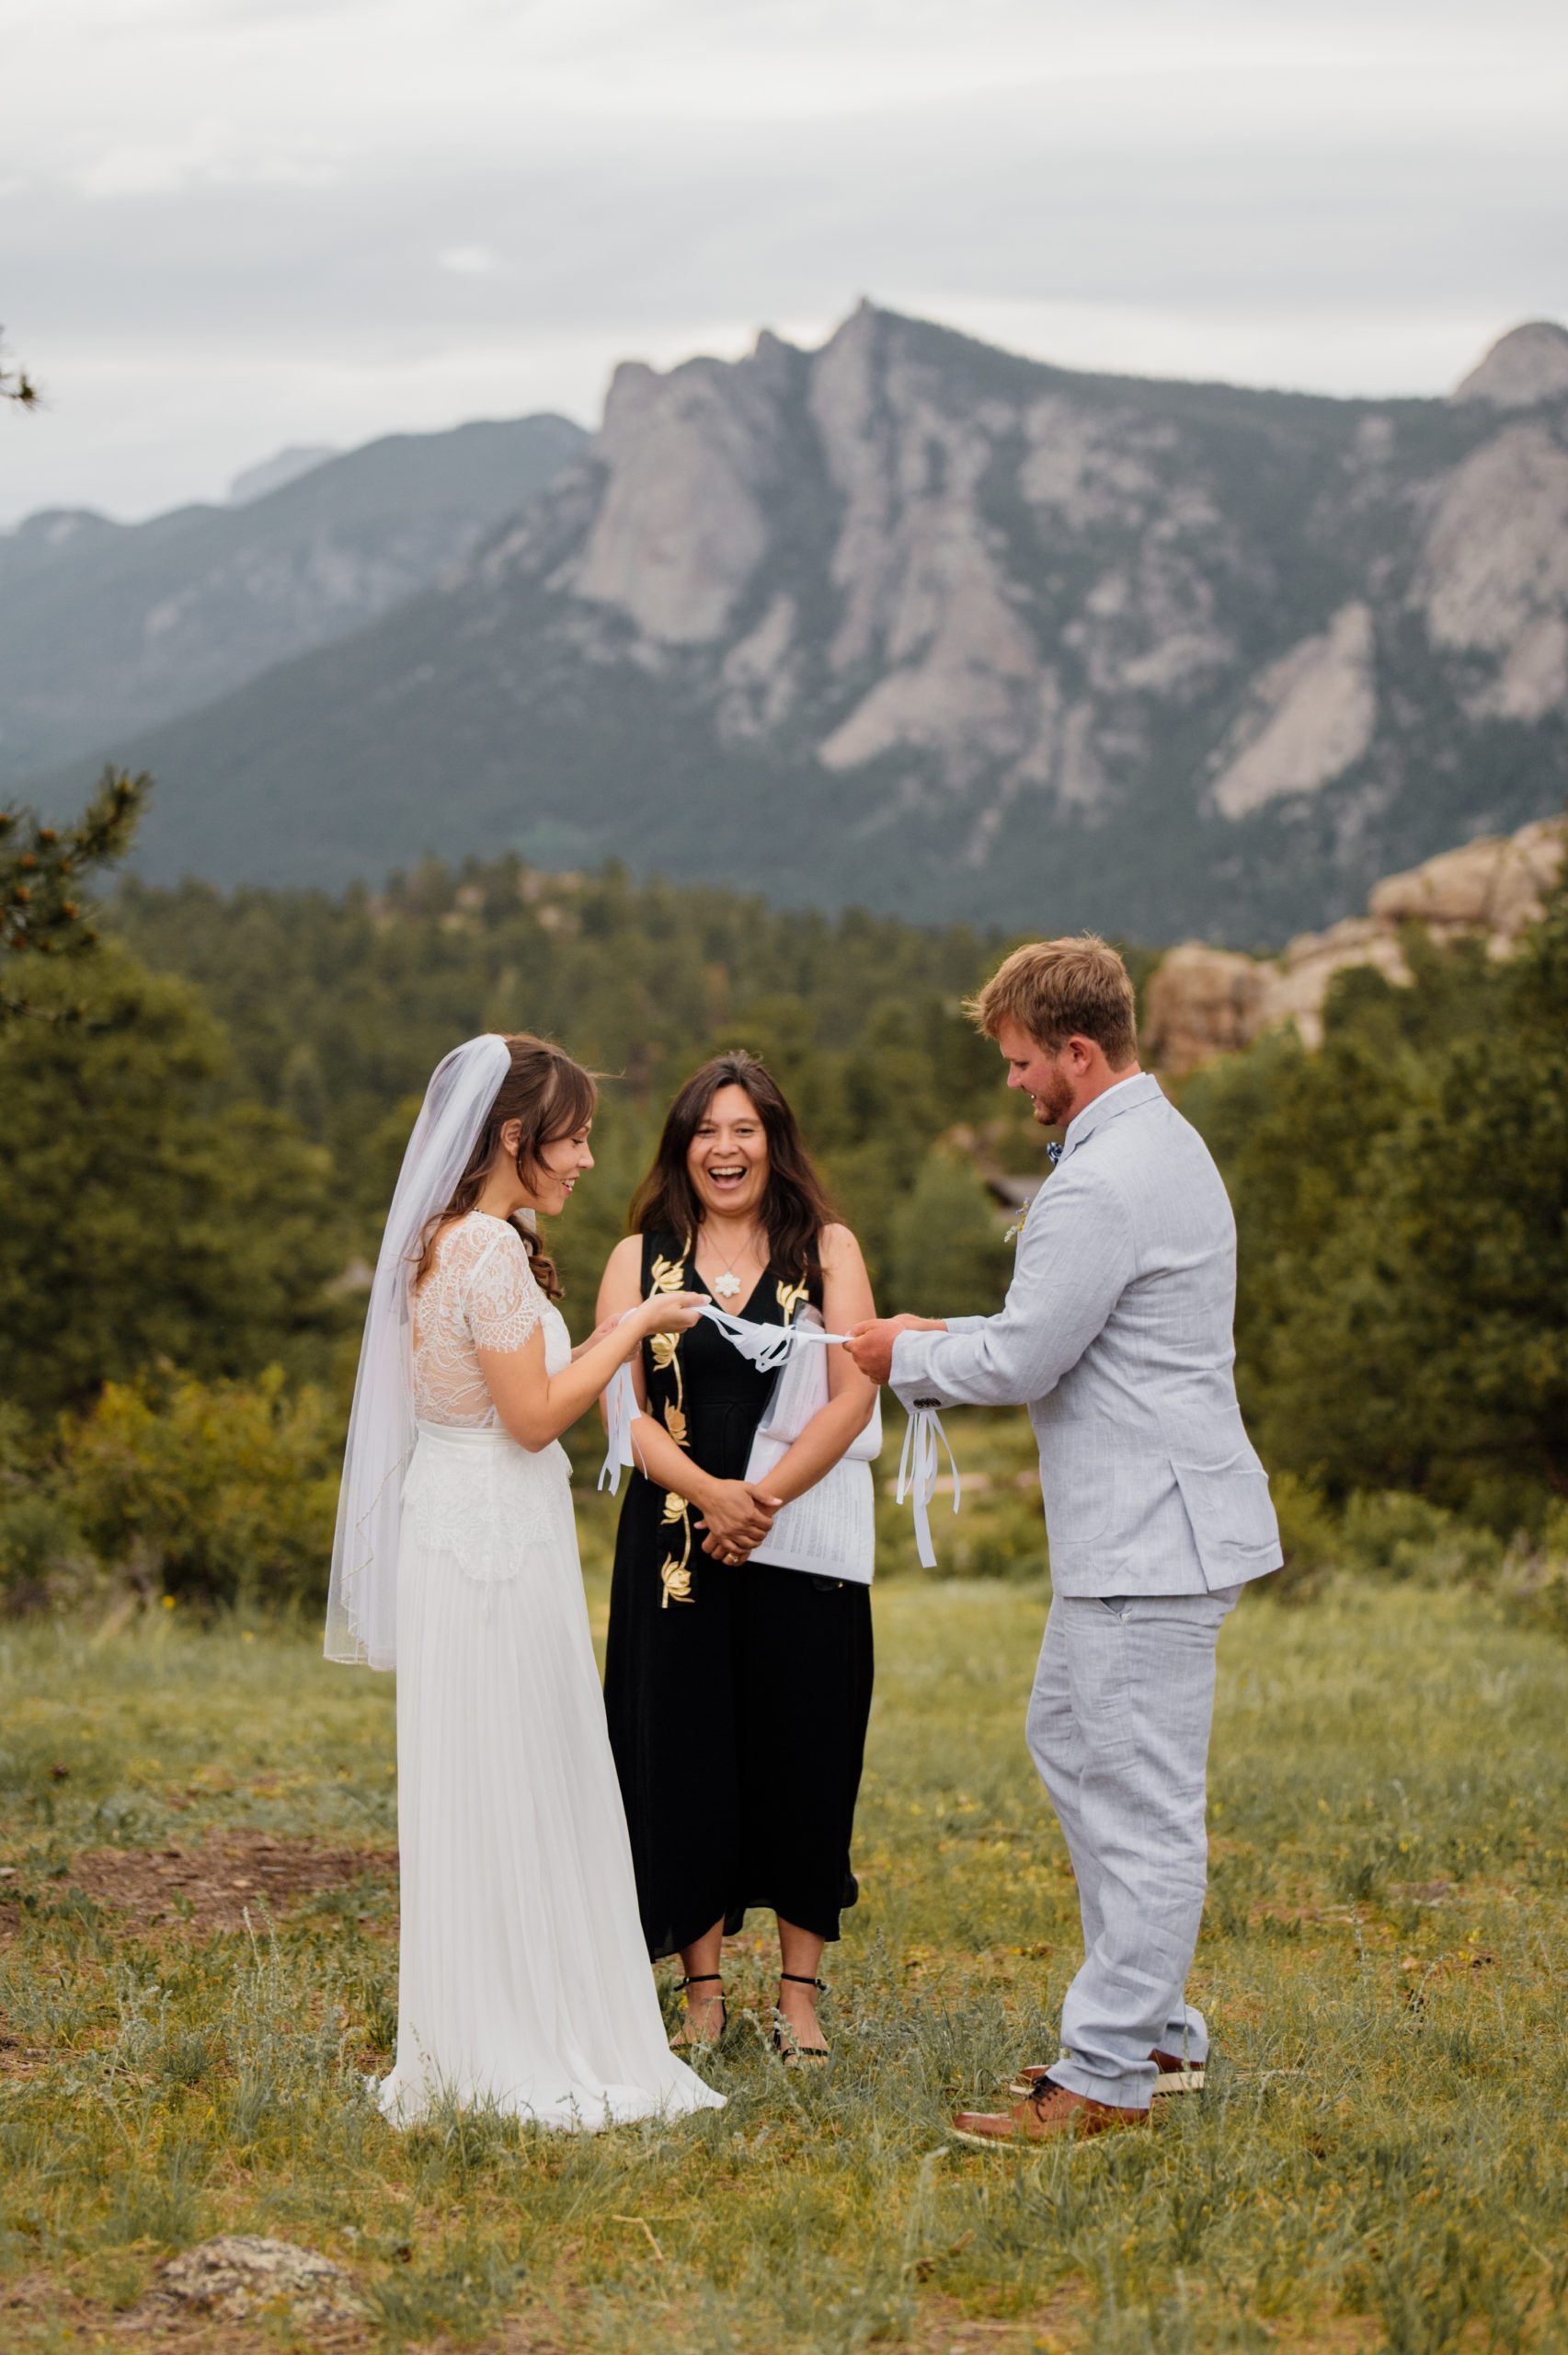 The next step in the hand-fasting ceremony for the bride and groom during their elopement ceremony at Knoll Willows in Estes Park.